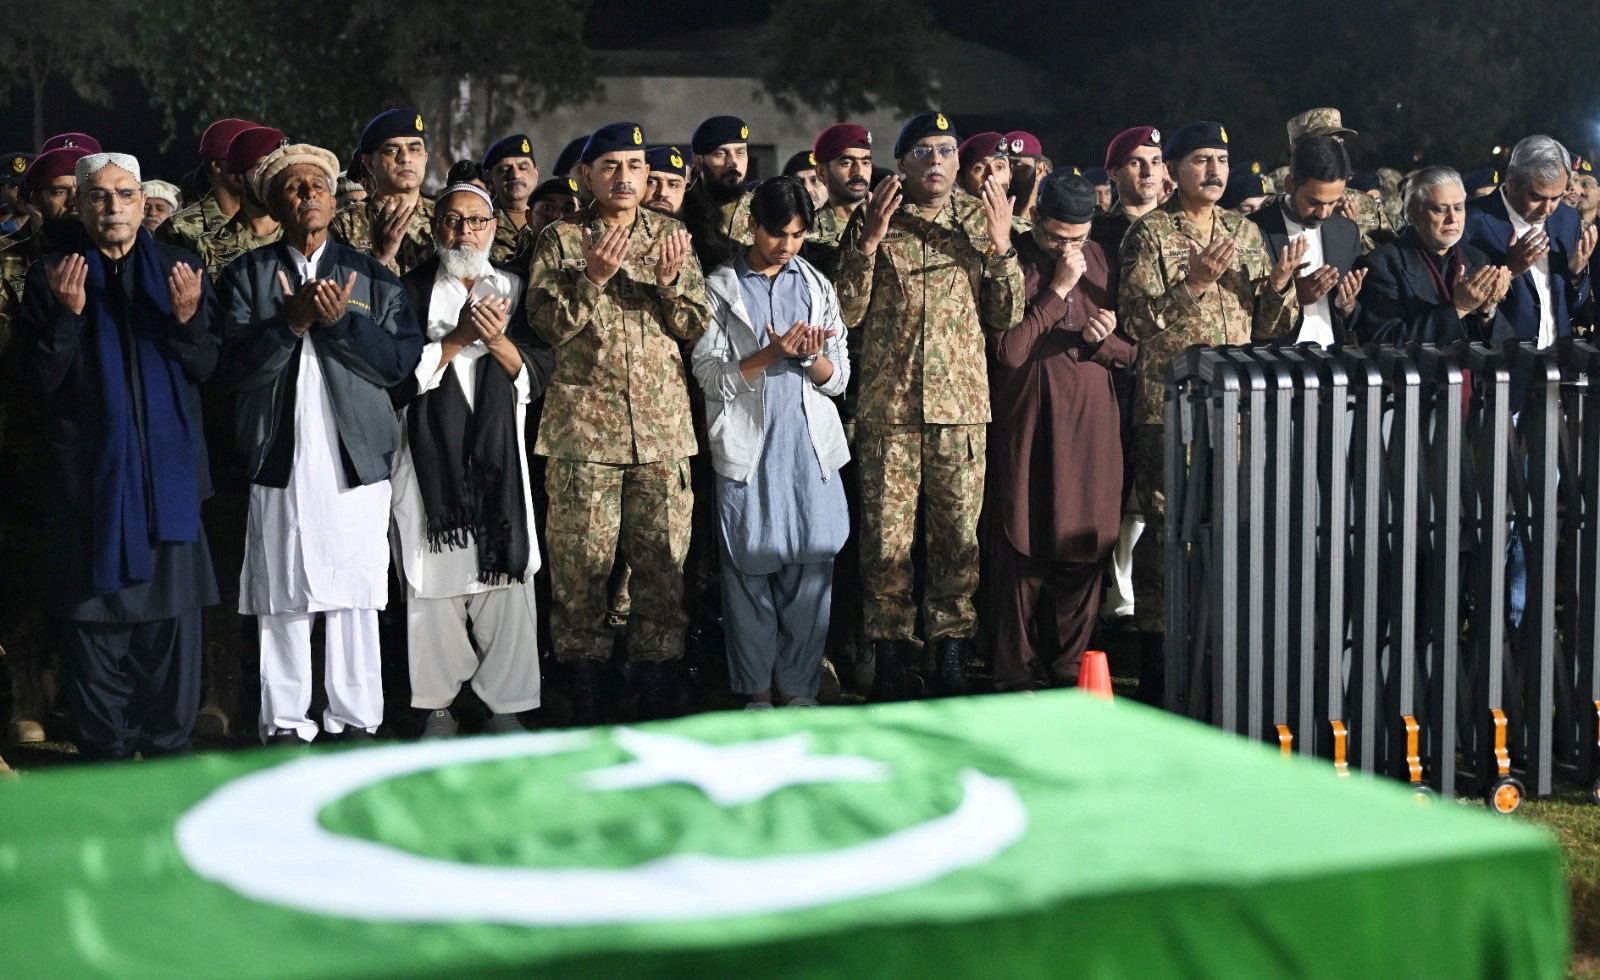 Pakistan President Asif Ali Zardari (left), army officers and others attend the funeral of Lieutenant Colonel Syed Kashif Ali and Captain Muhammad Ahmed Badar, who were killed in an attack on a military post in North Waziristan district on Saturday. Photo: Handout via Reuters